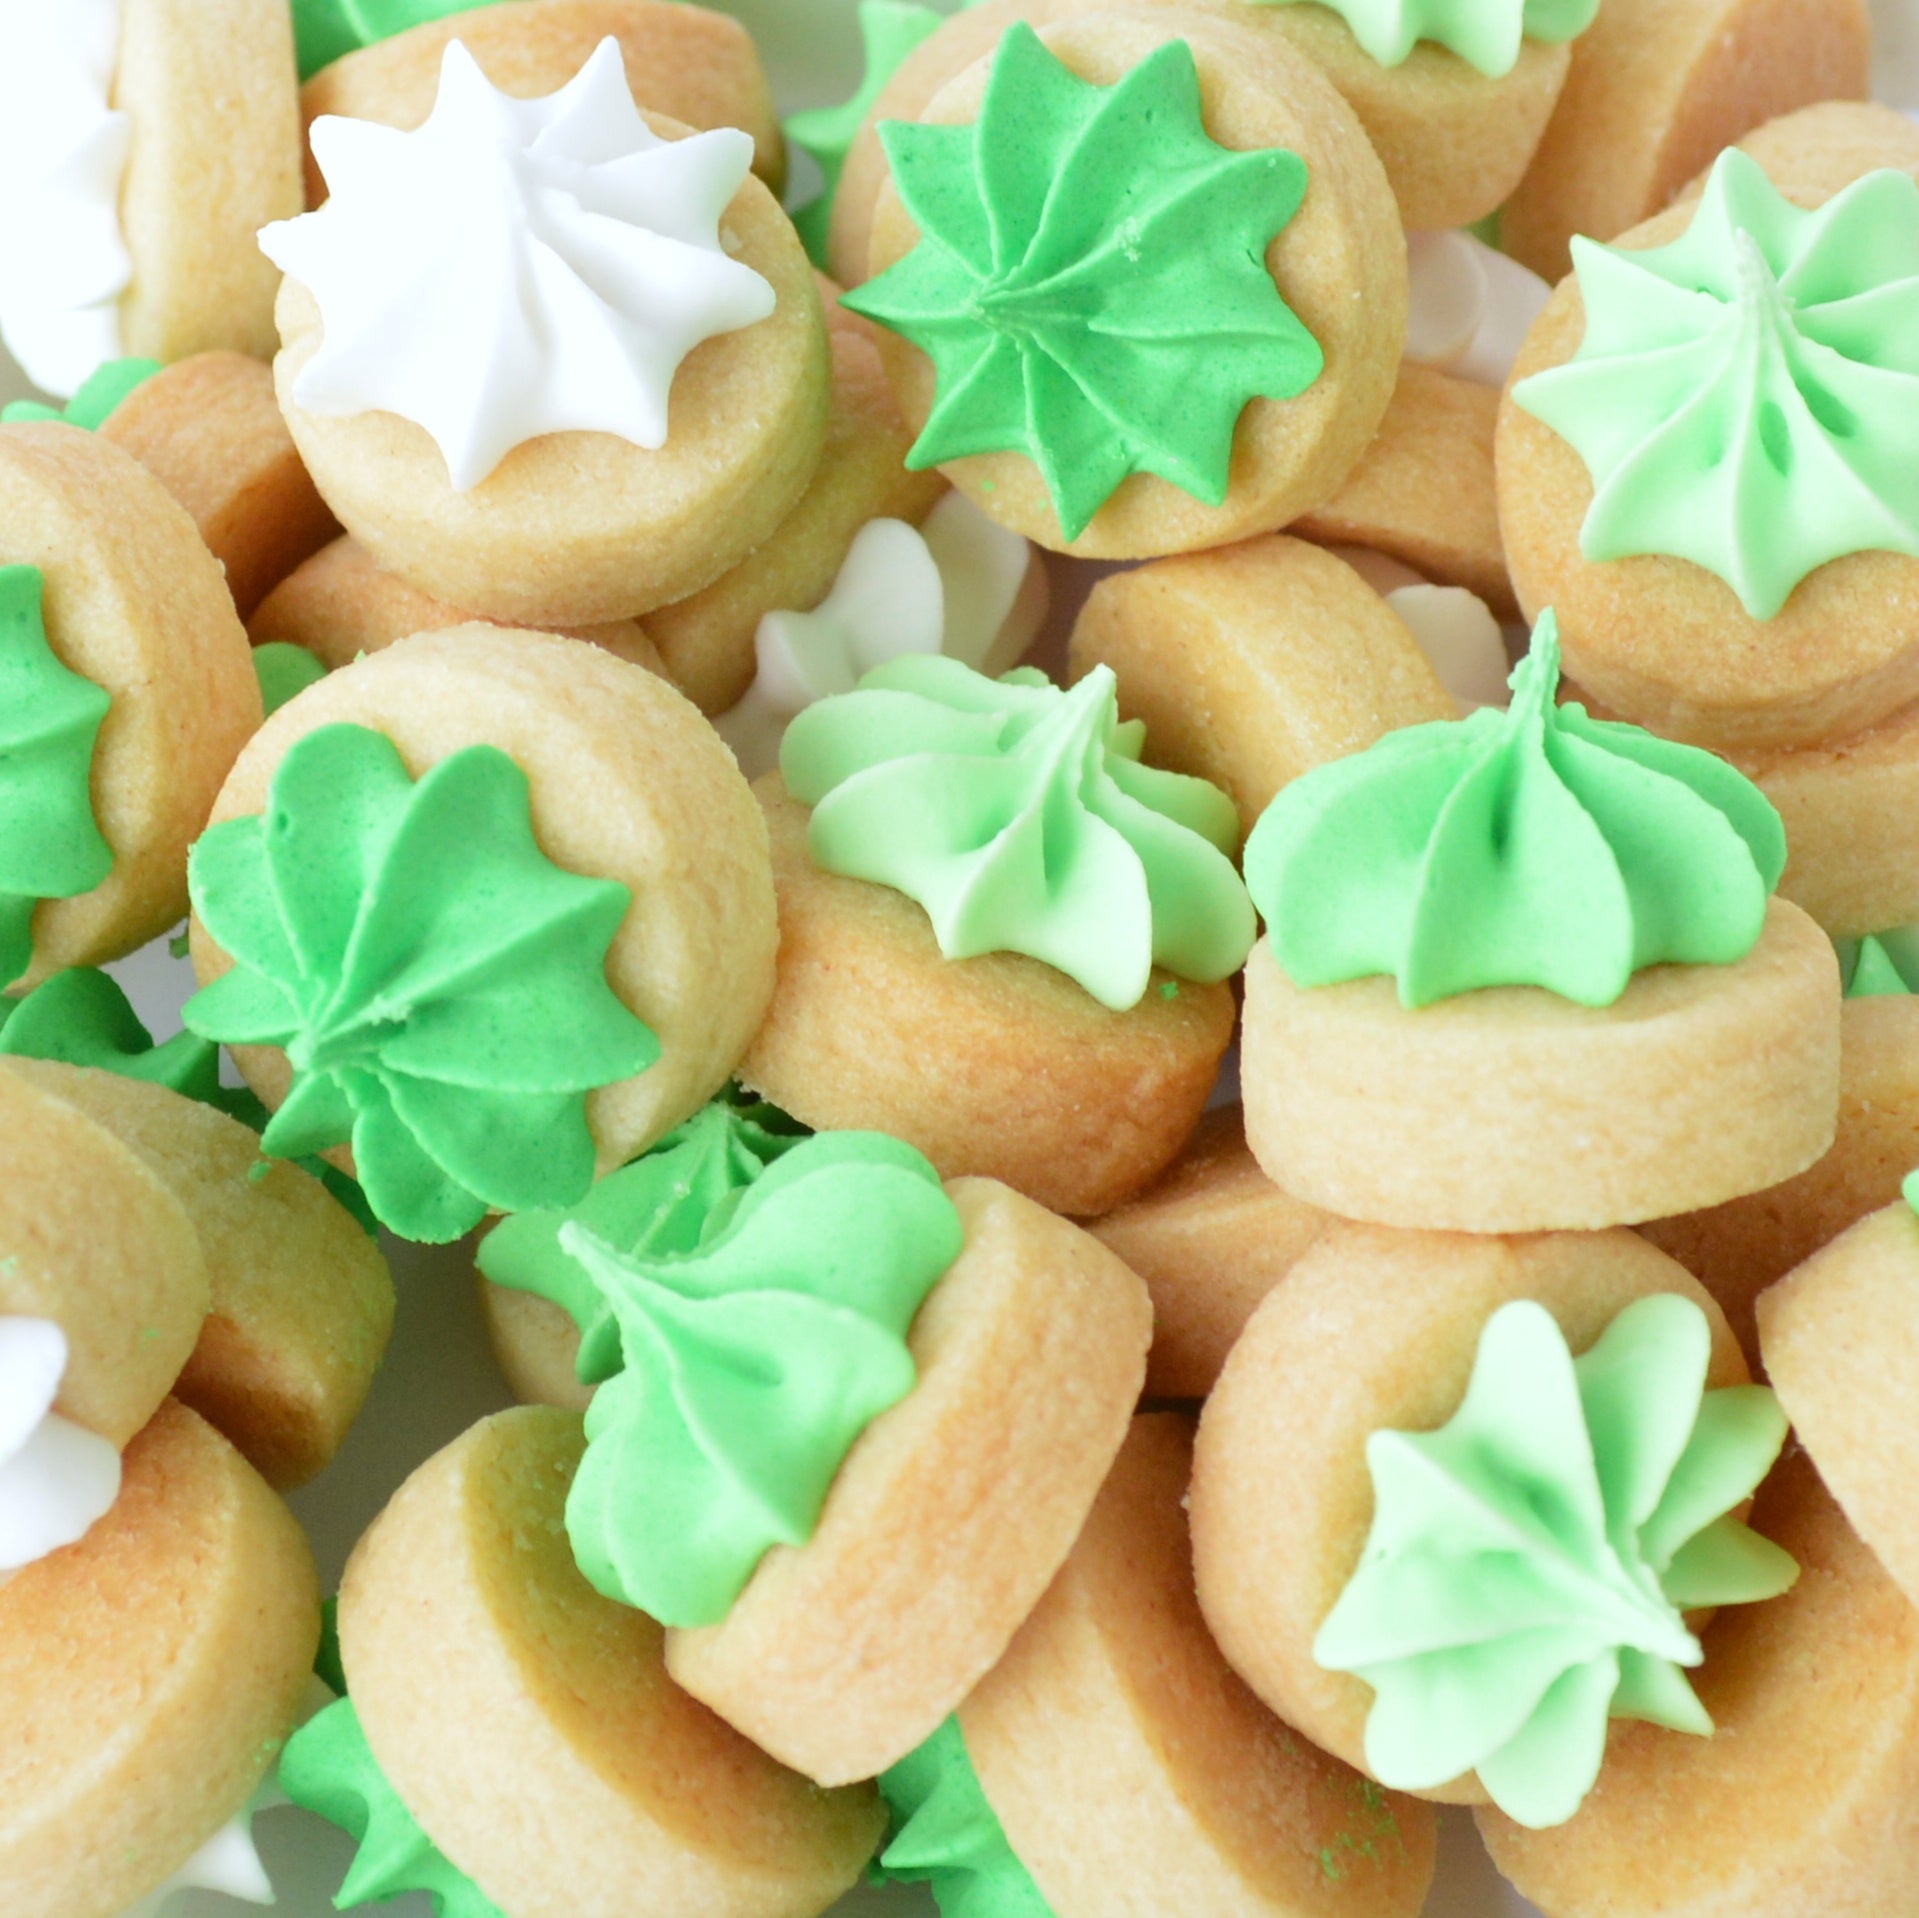 Biscuit iced gems in shades of green by Katie's Biscuit shop